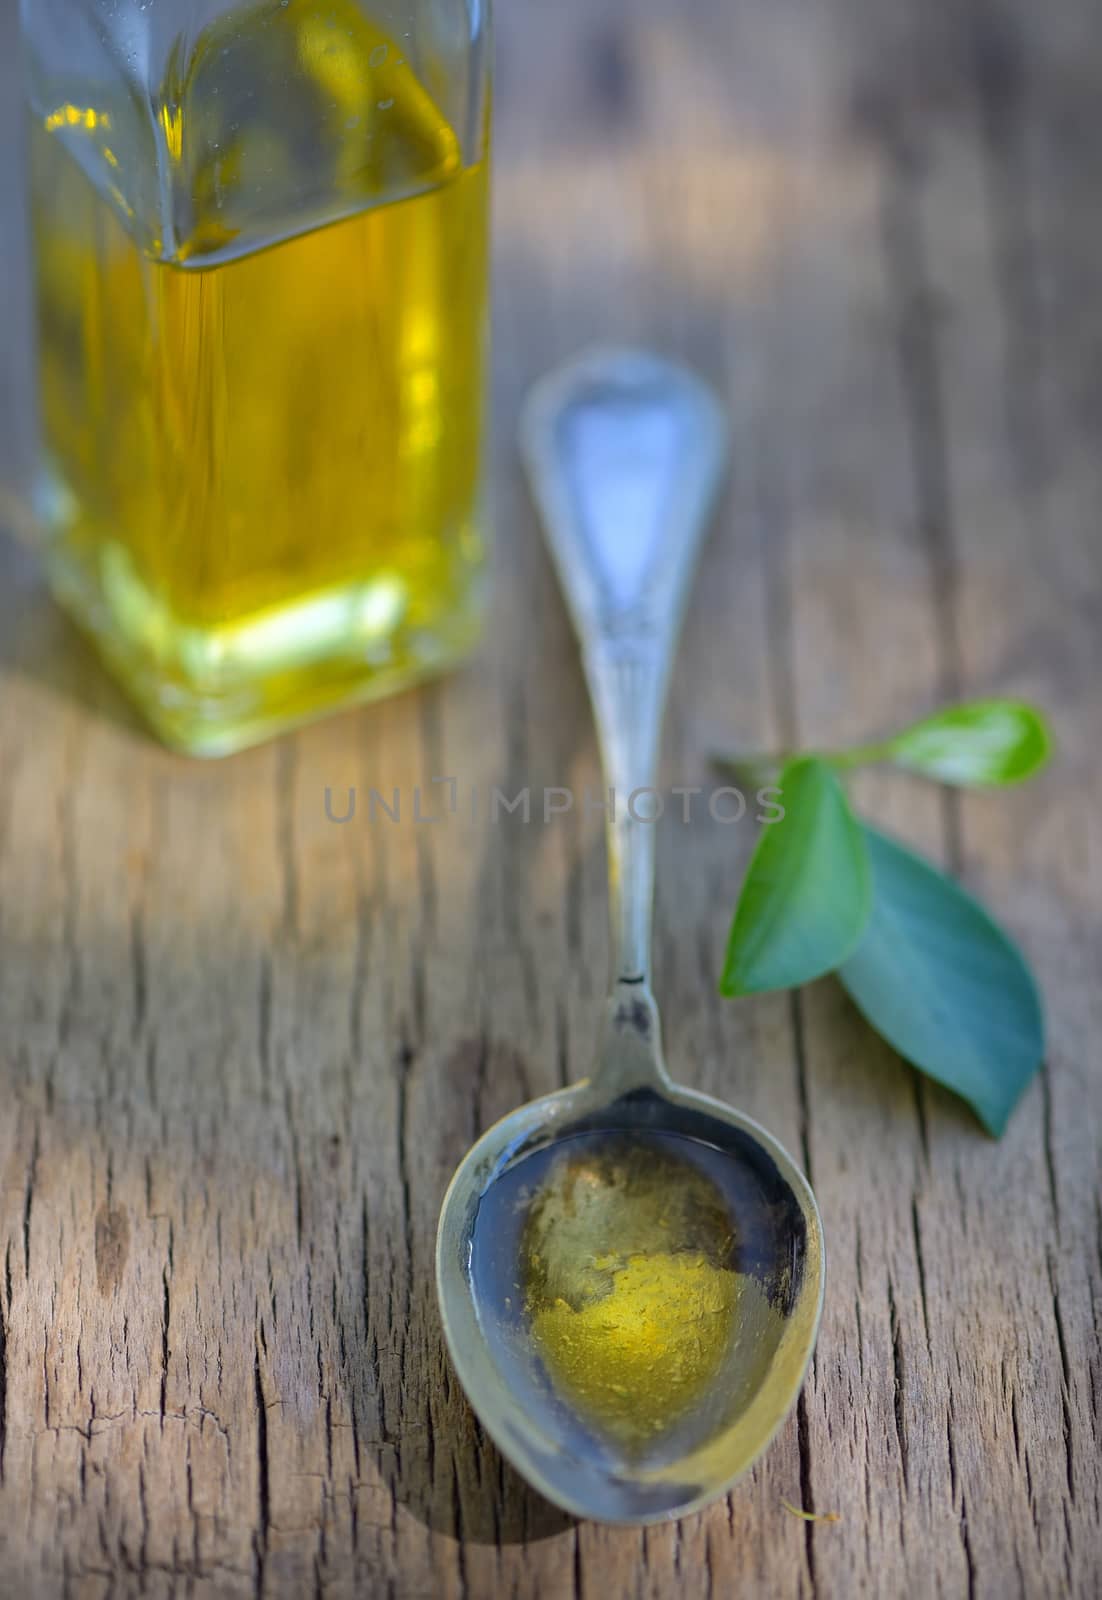 Spoon full of olive oil by mady70